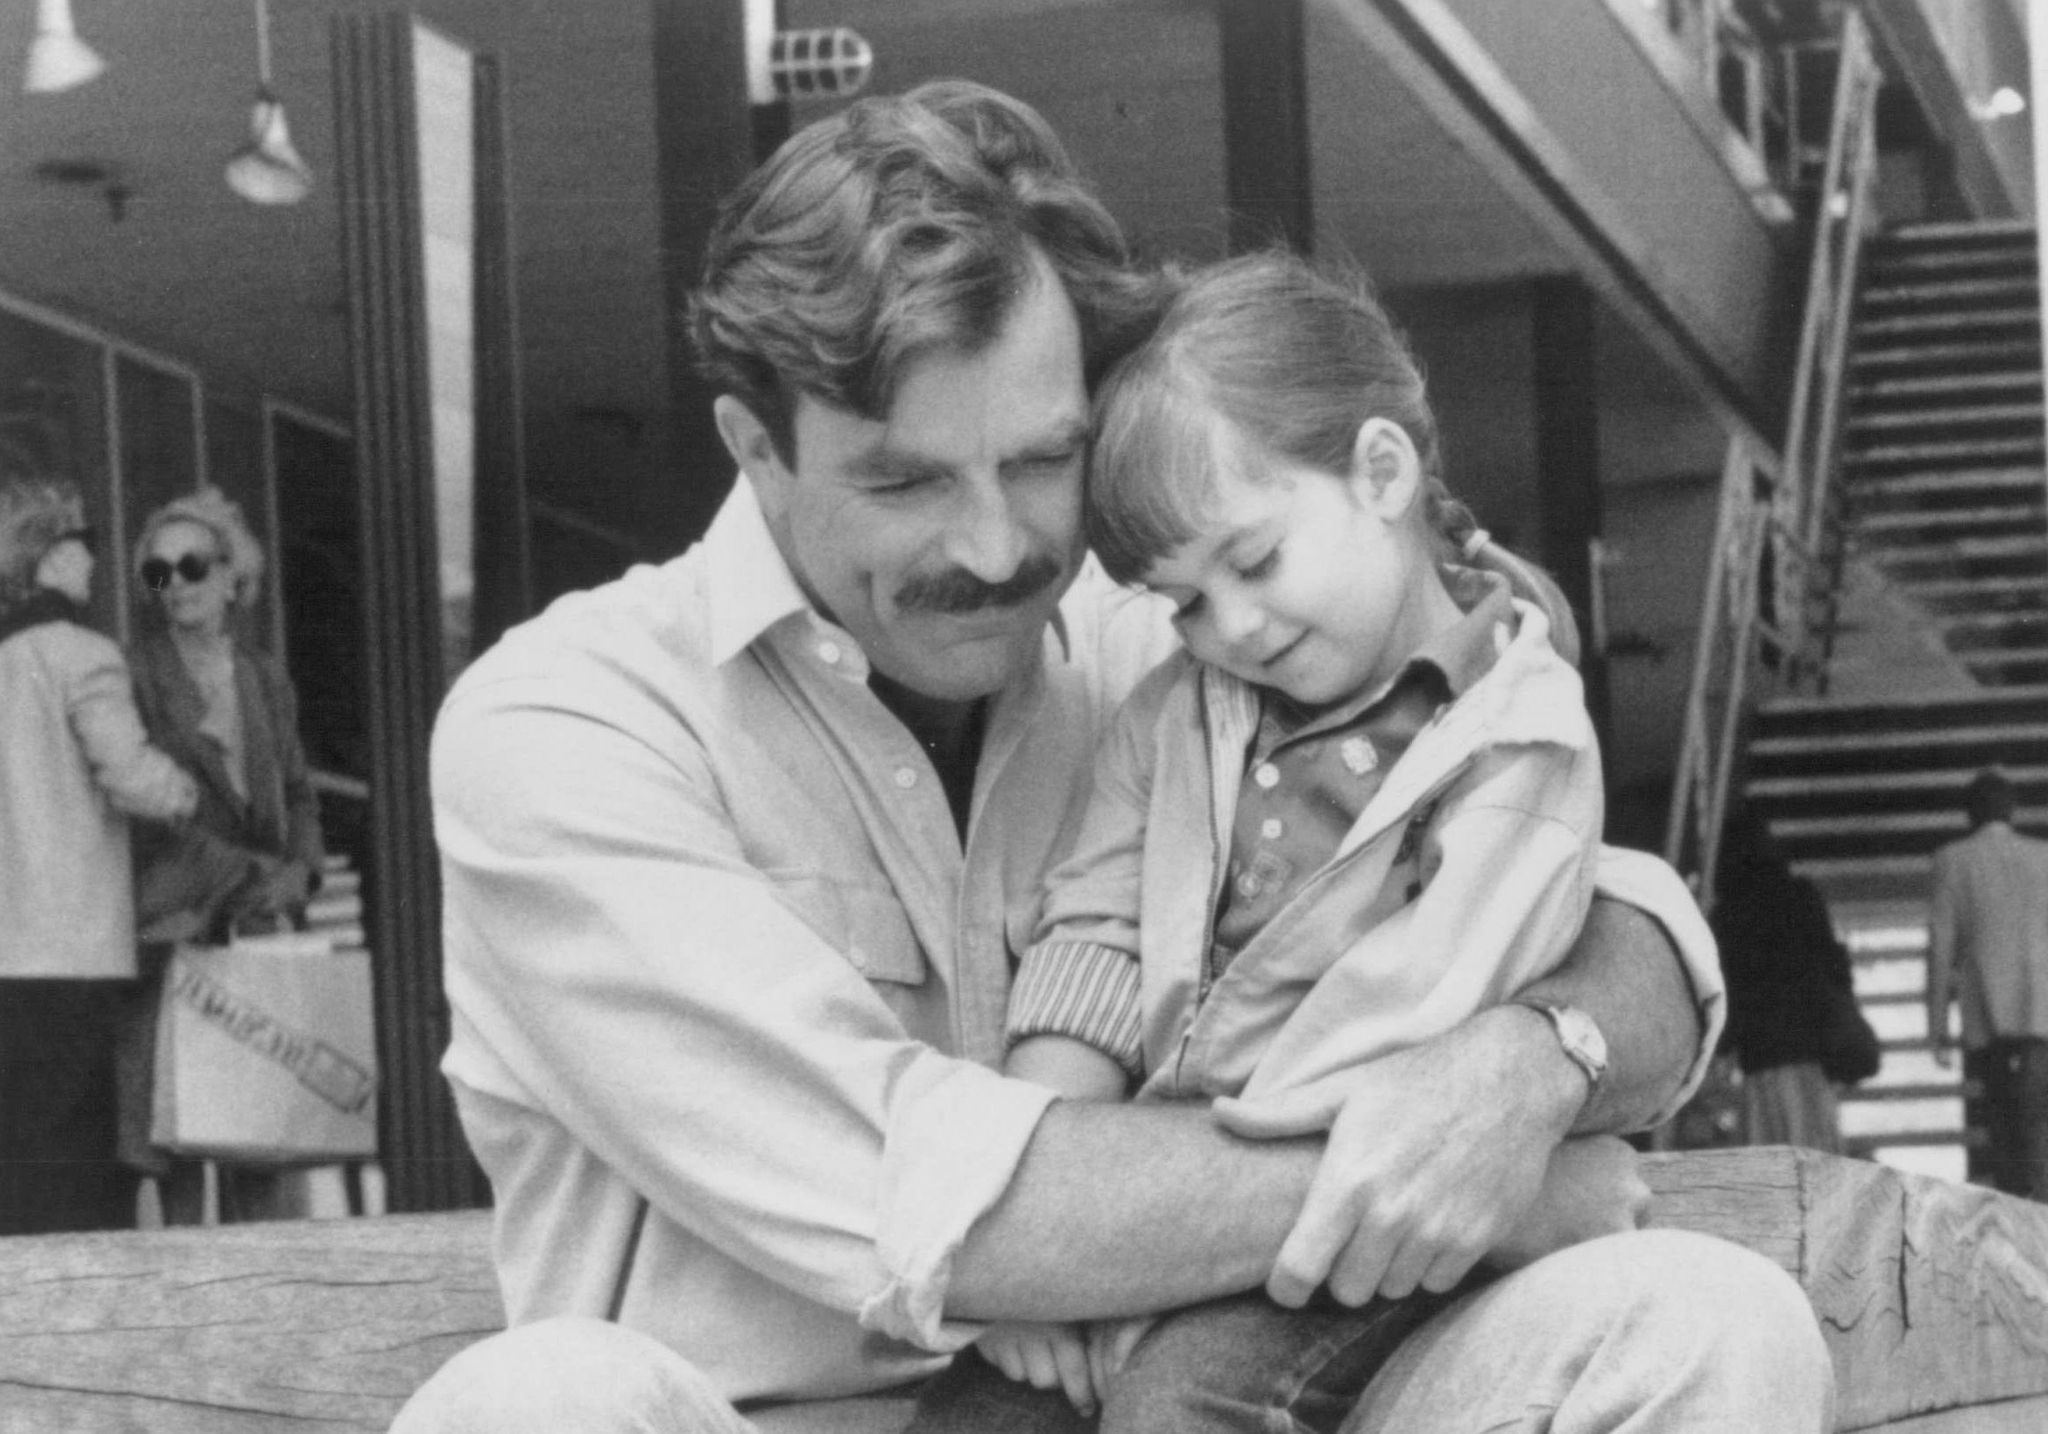 Still of Tom Selleck and Robin Weisman in 3 Men and a Little Lady (1990)